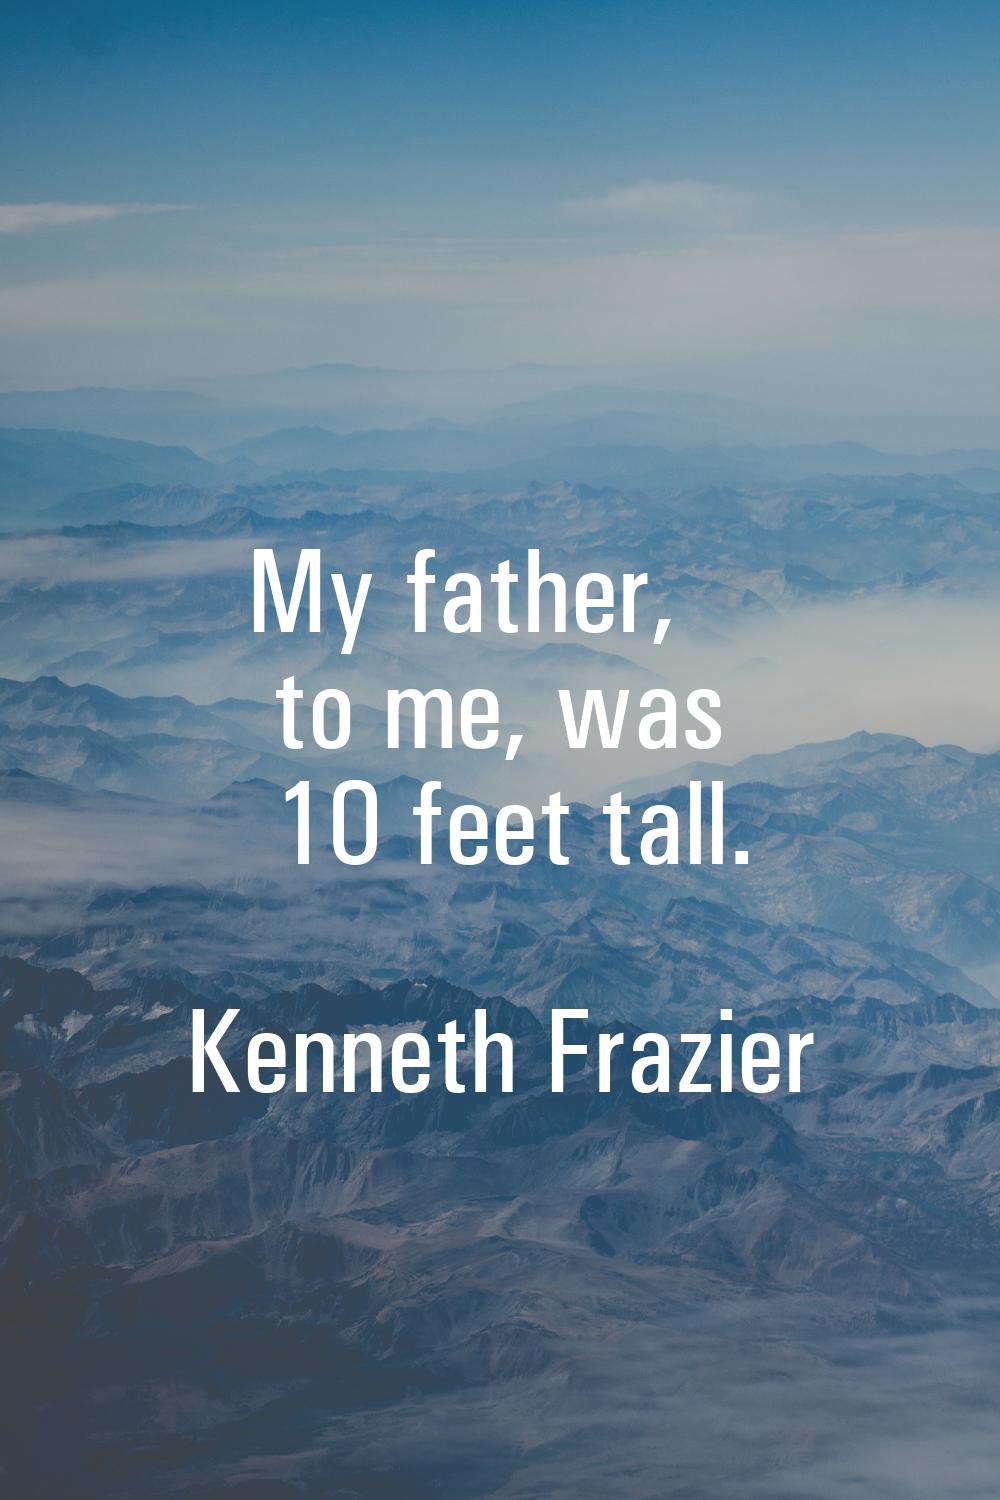 My father, to me, was 10 feet tall.